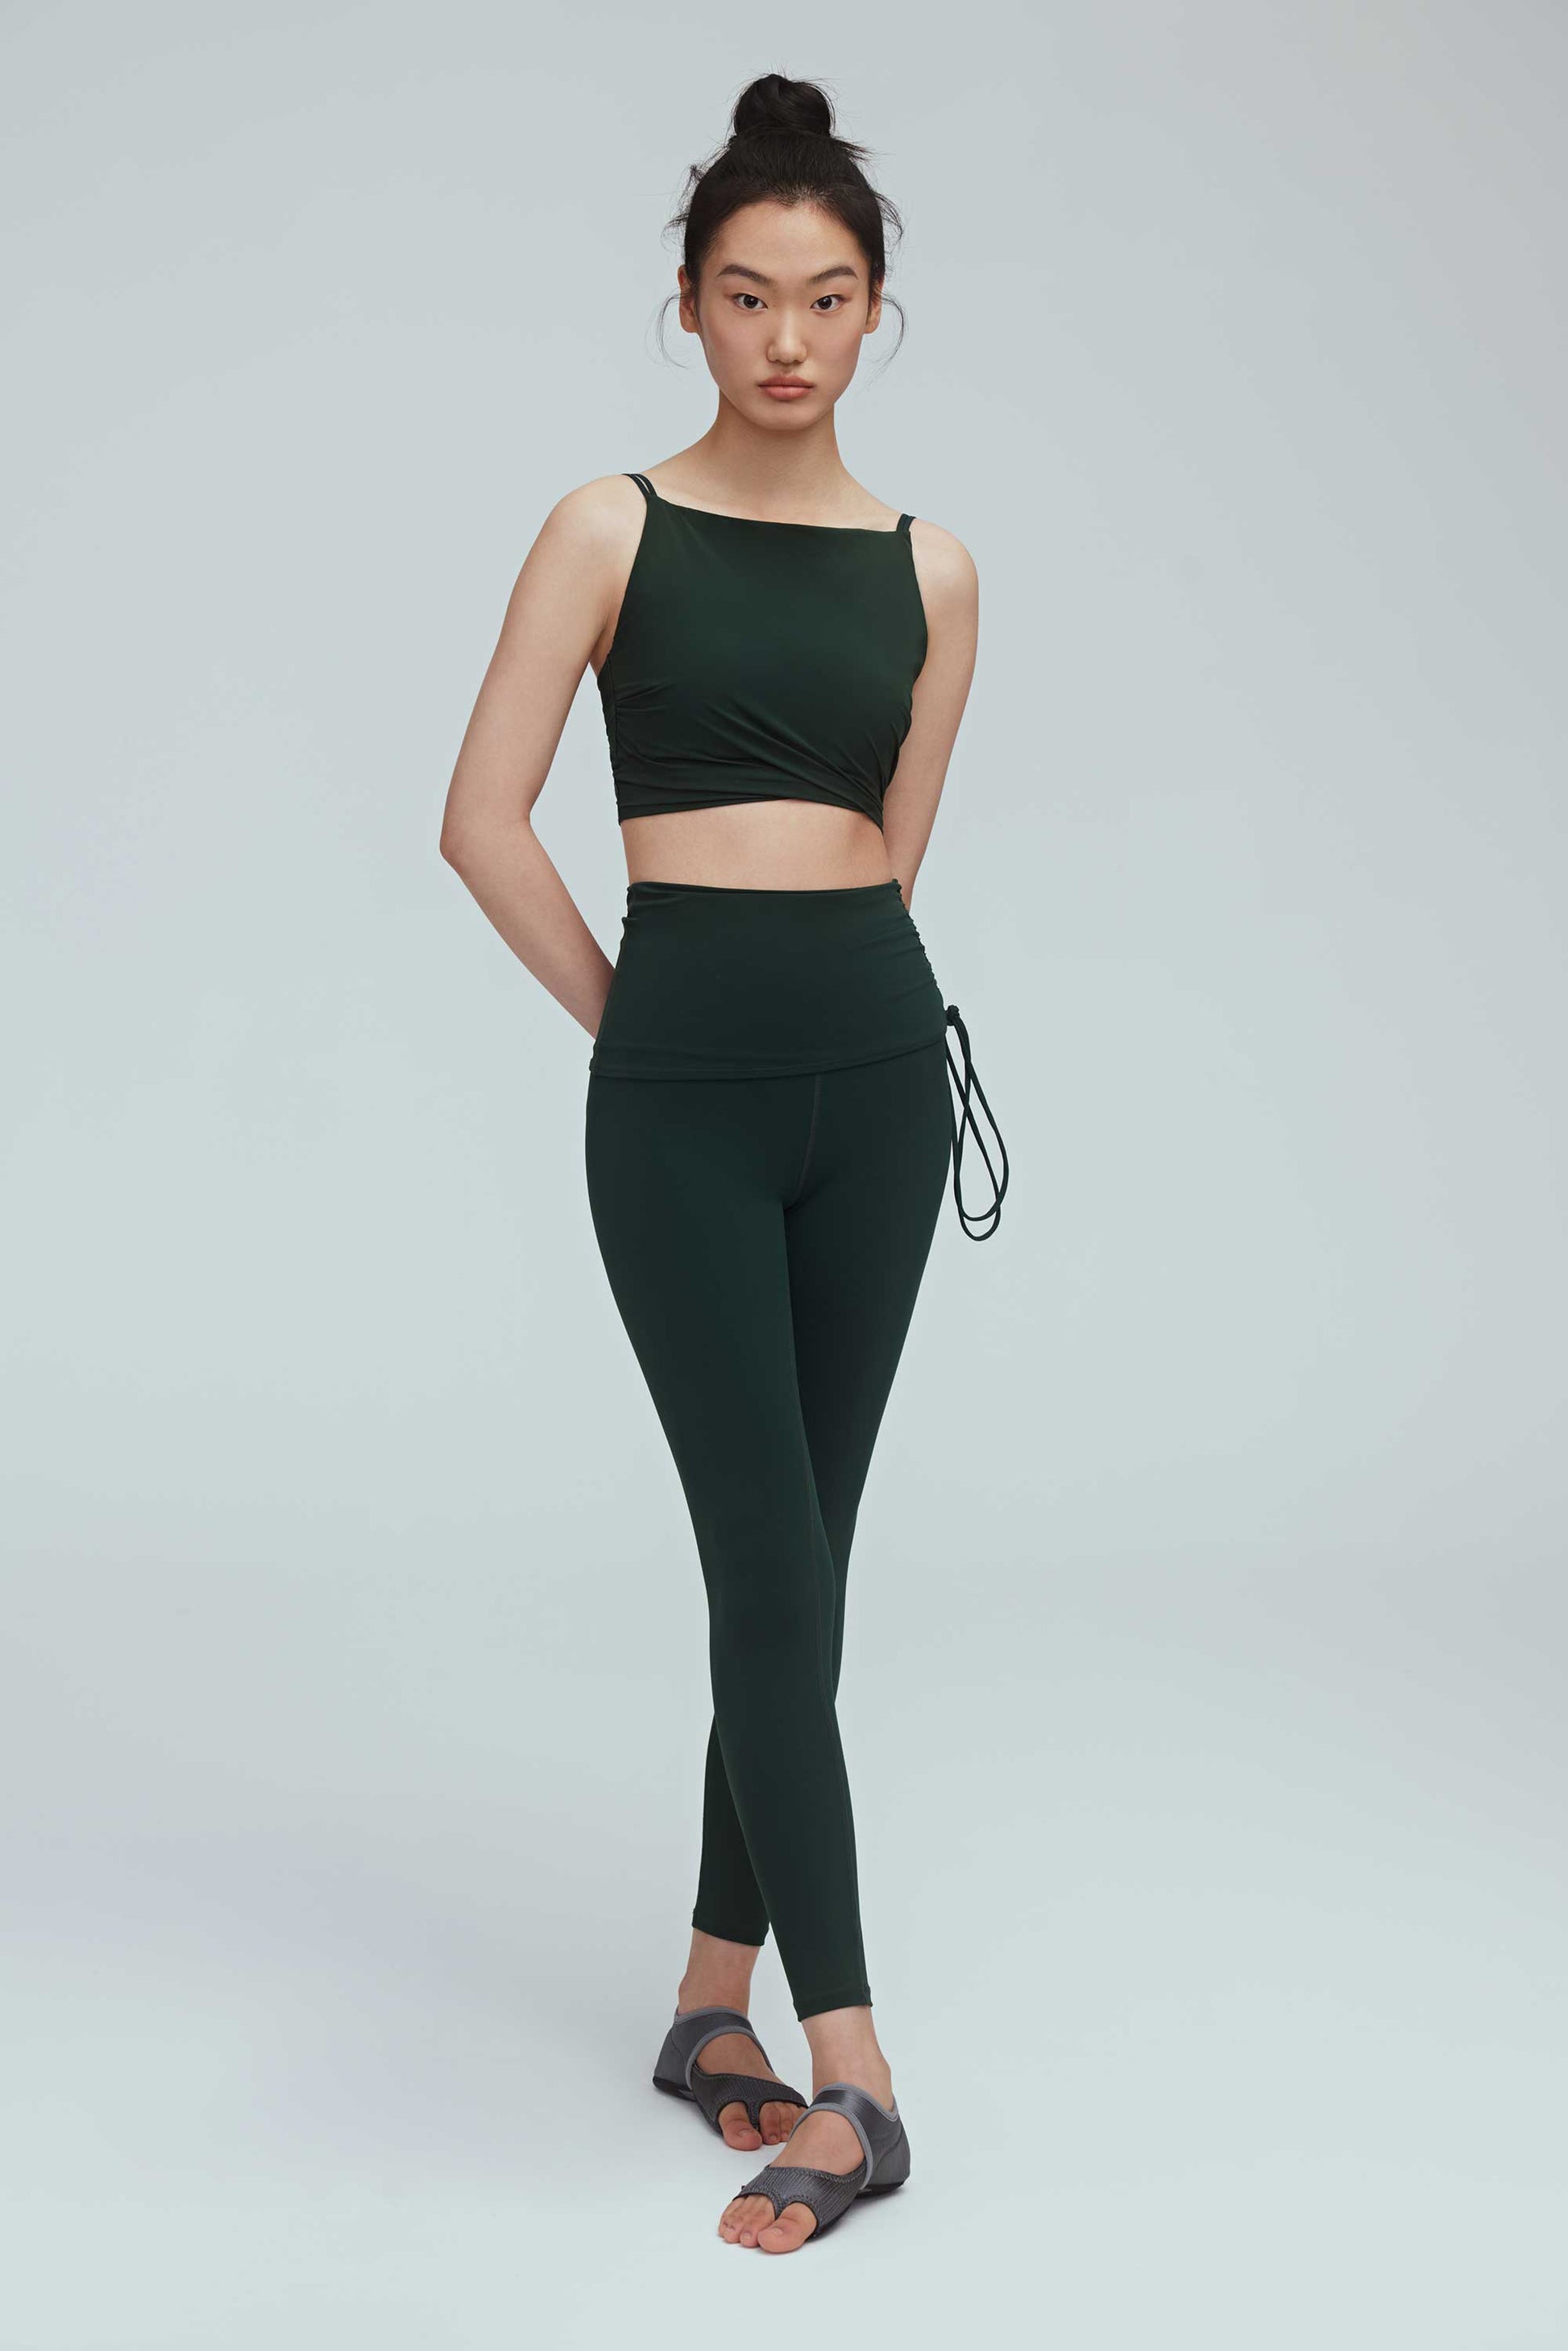 a woman wearing a crew neck dark green sports bra with pleats details and a pair of matching leggings with double layered waist and side knot.